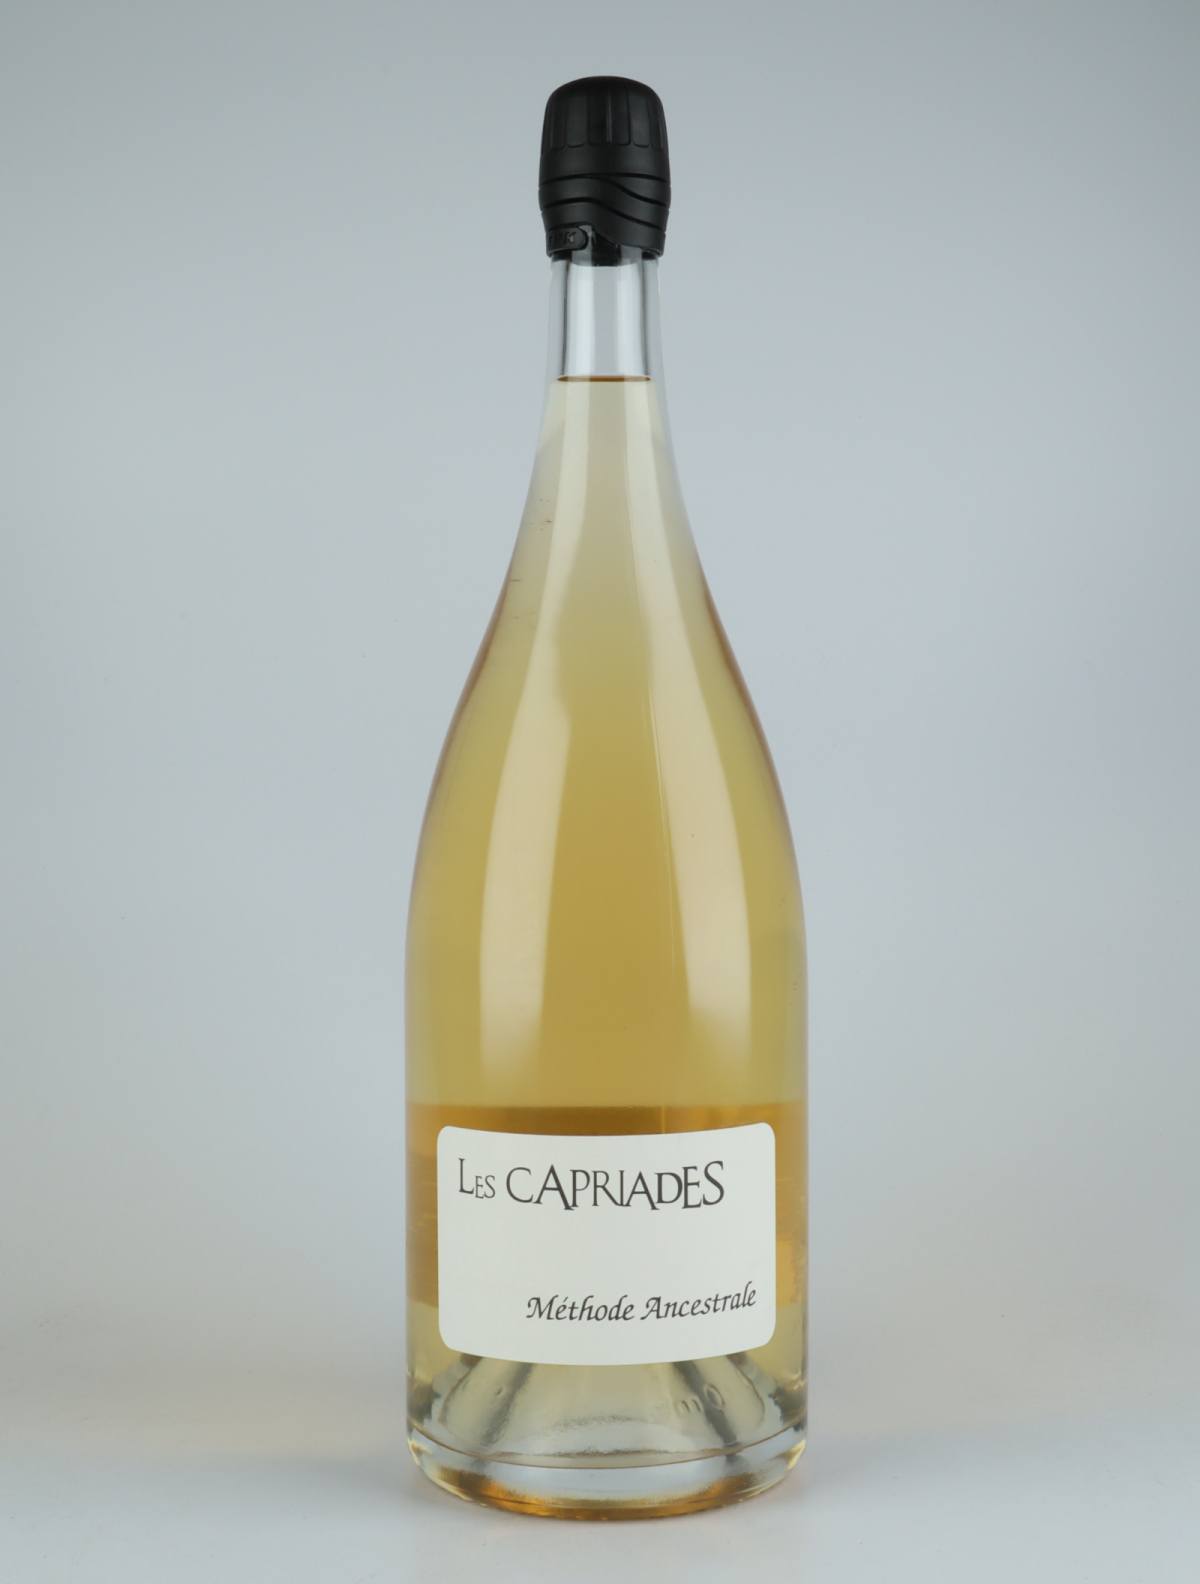 A bottle 2017 Pet'Sec Sparkling from Les Capriades, Loire in France